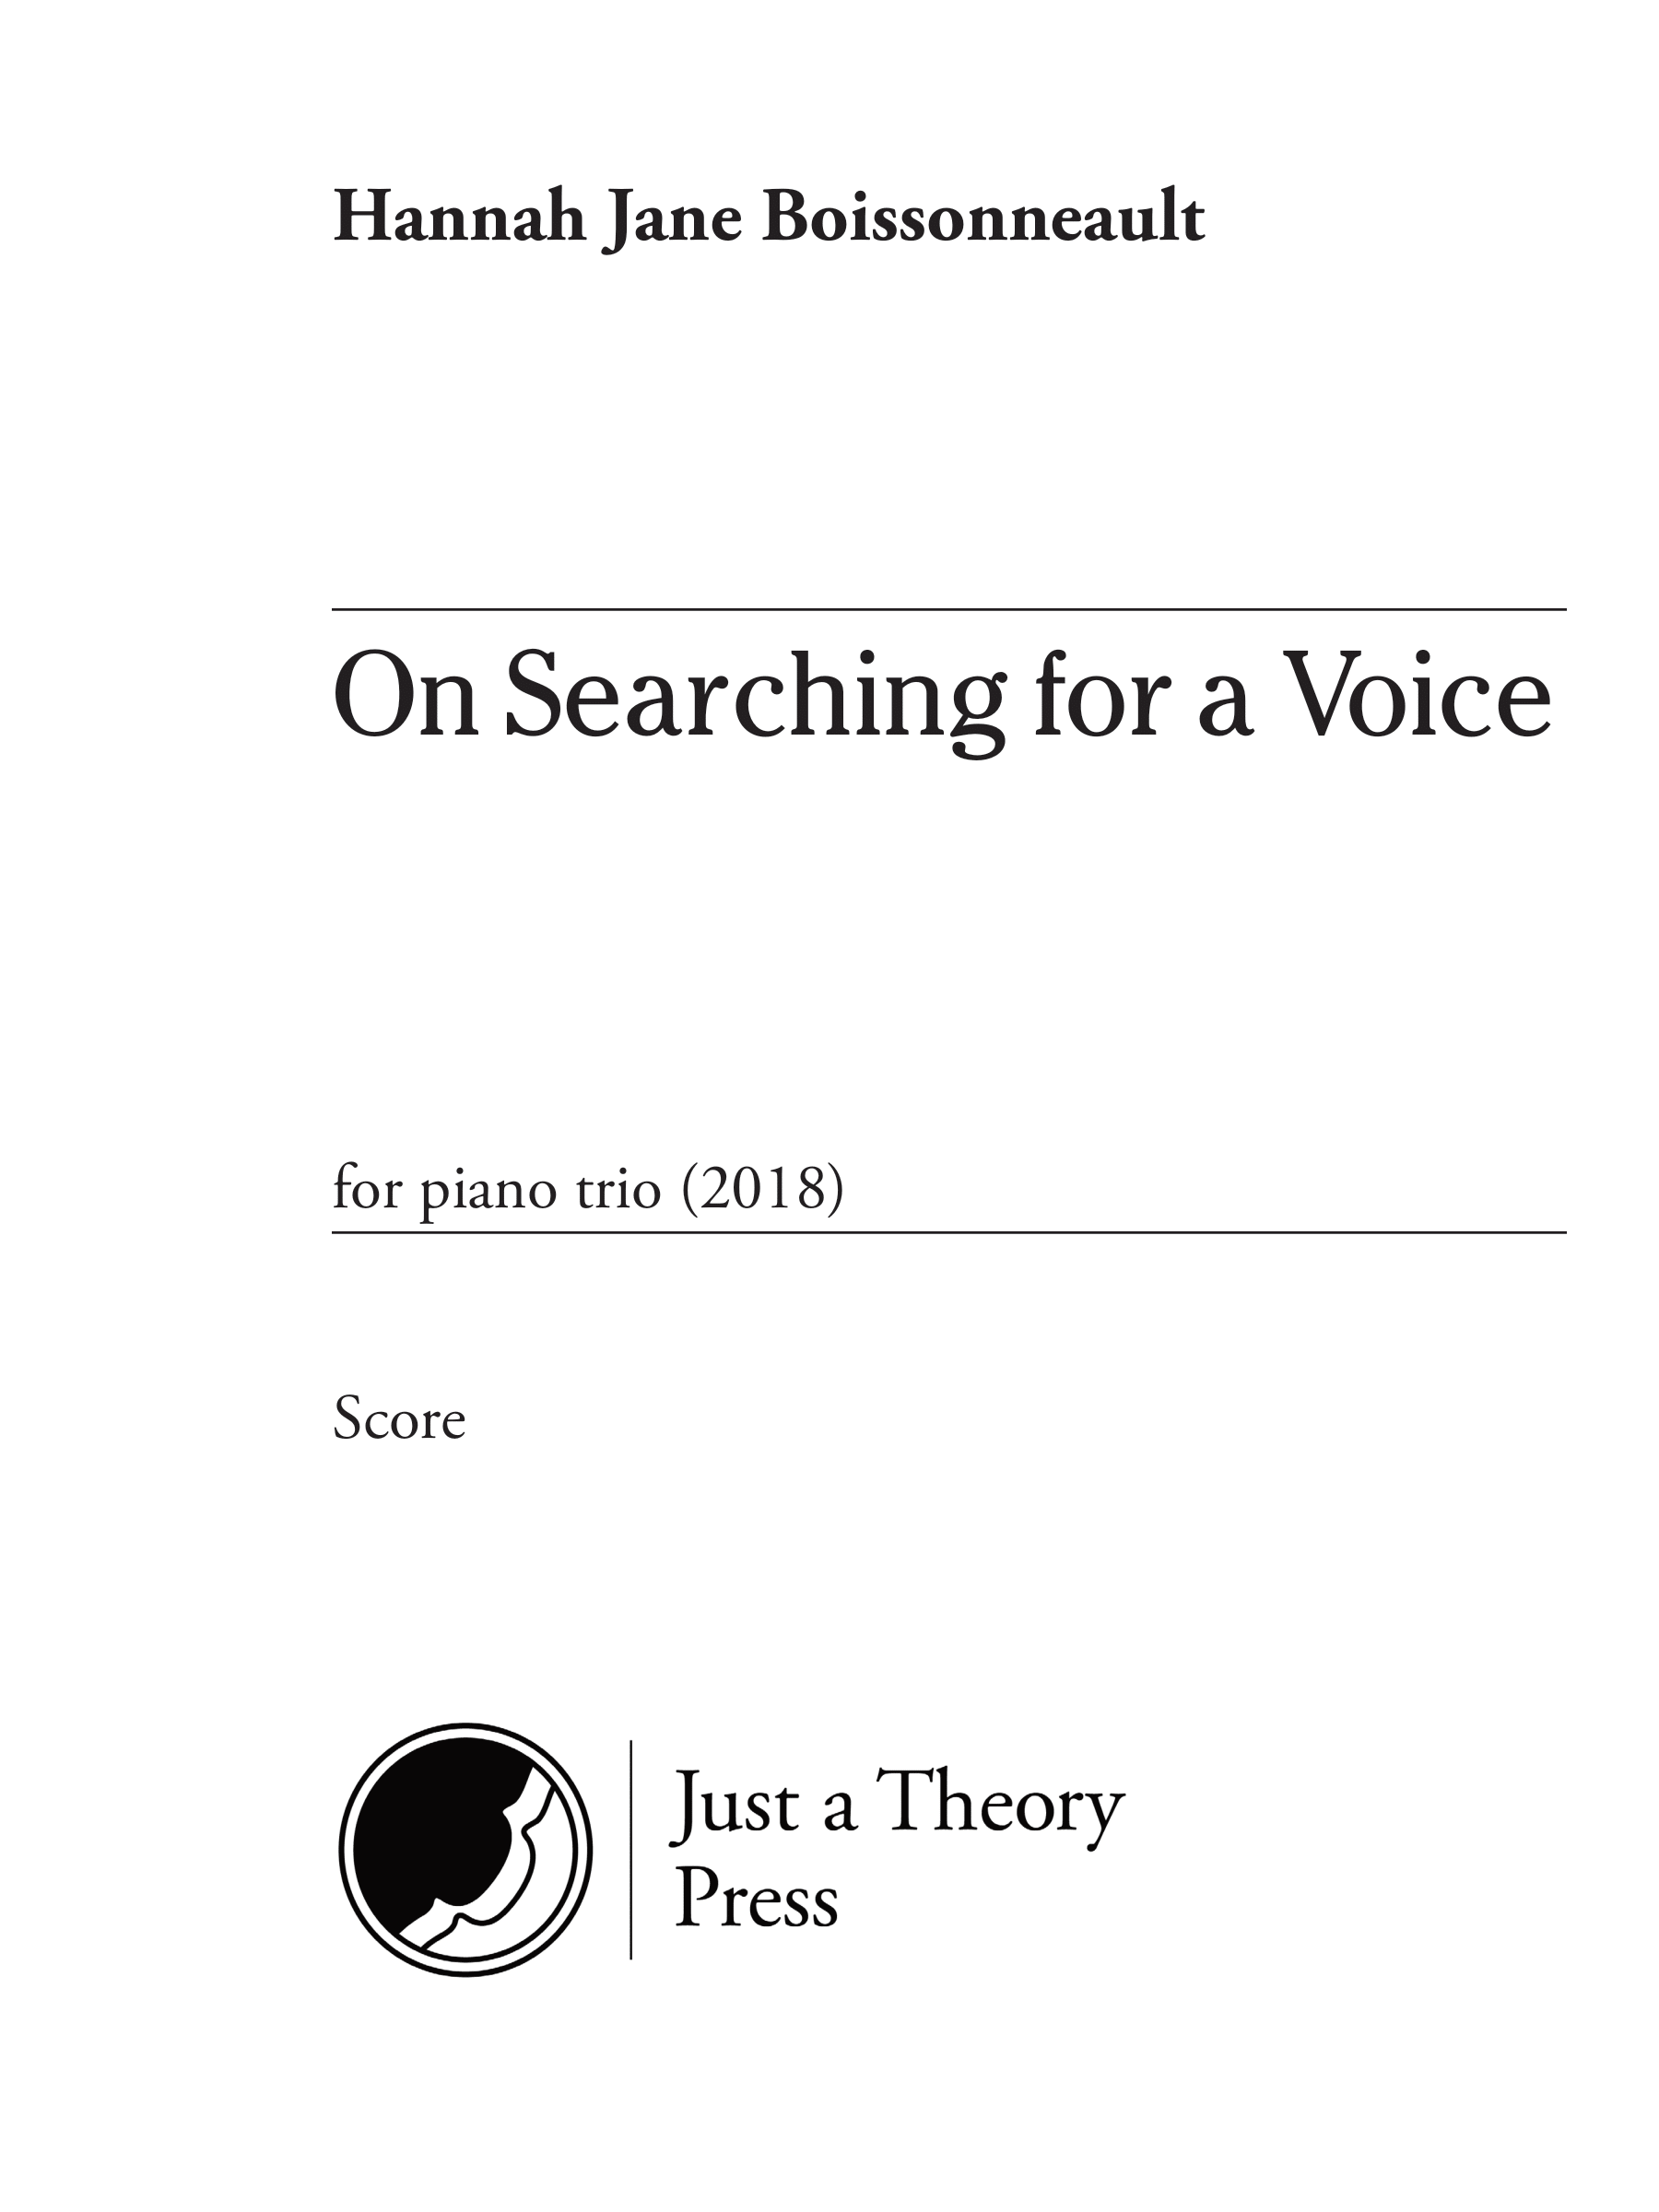 On Searching For a Voice